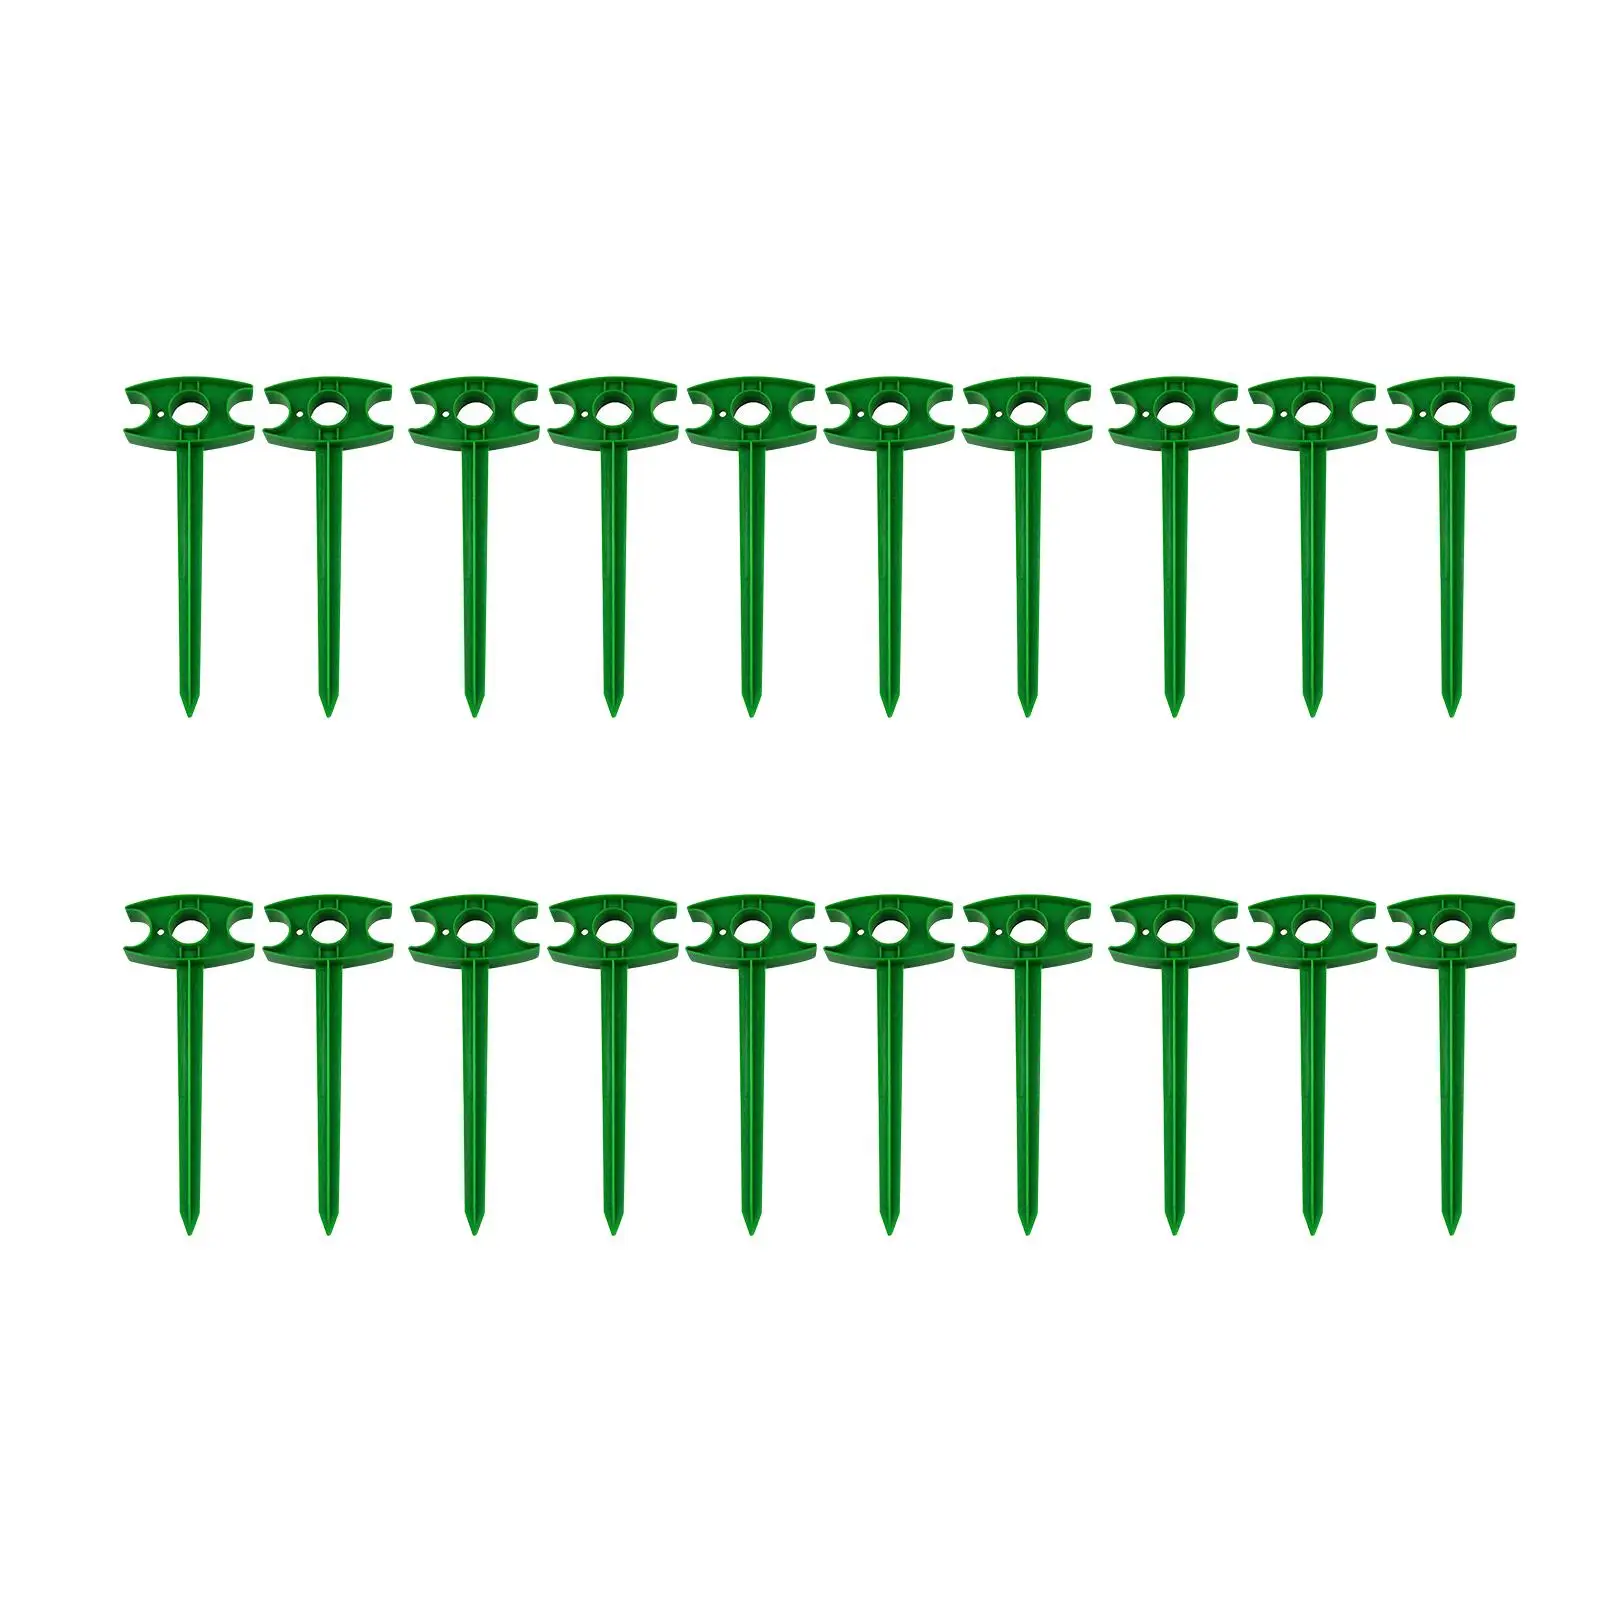 20x Landscape Stakes Mat Cloth Nails Fixed Fences 25cm Long Garden Stakes for Holding Down Tents Fabric Lawn Edging Greenhouse